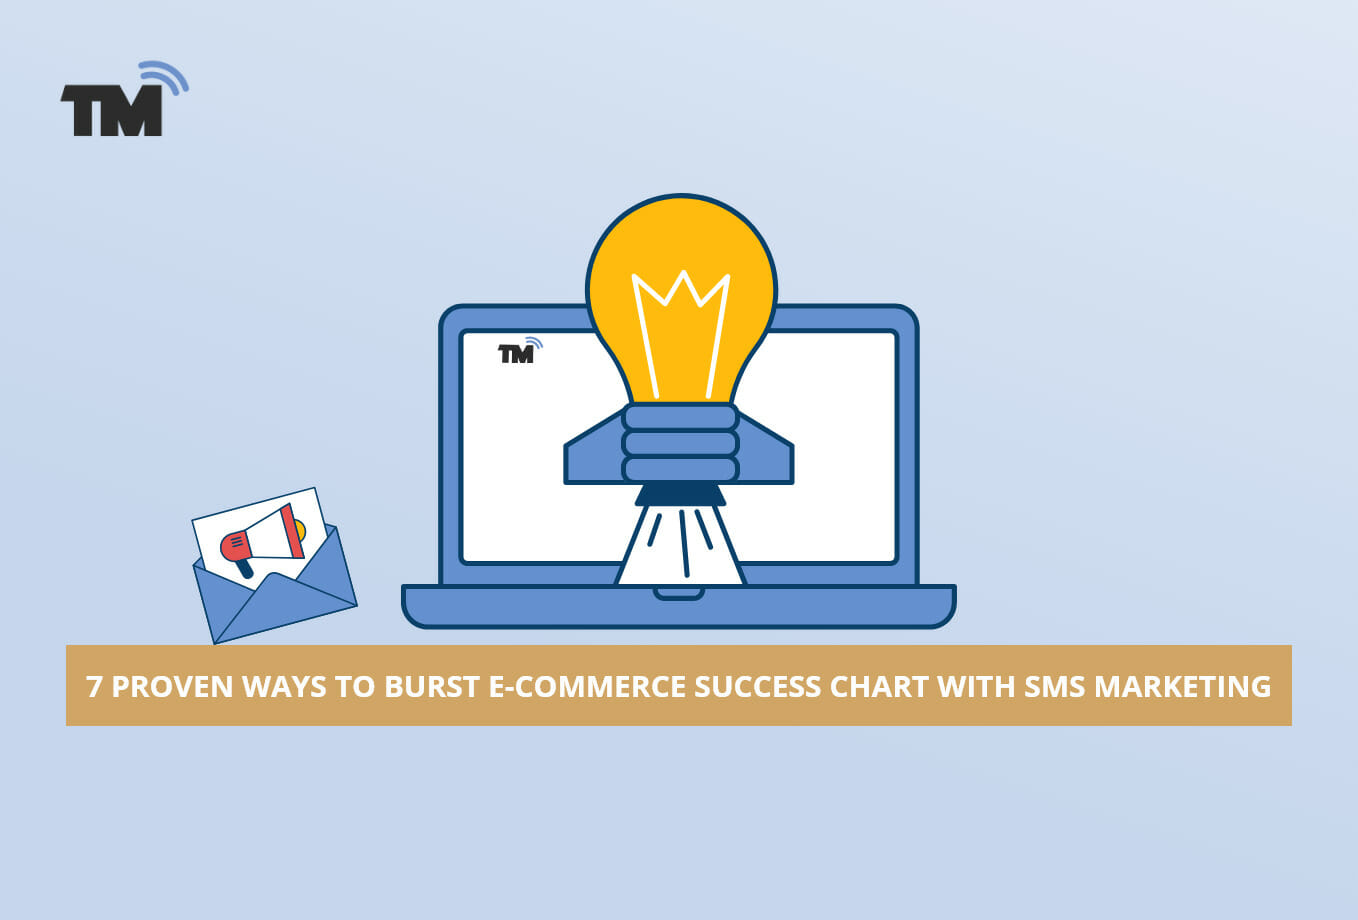 7 Proven Ways To Burst E-Commerce Success Chart With SMS Marketing